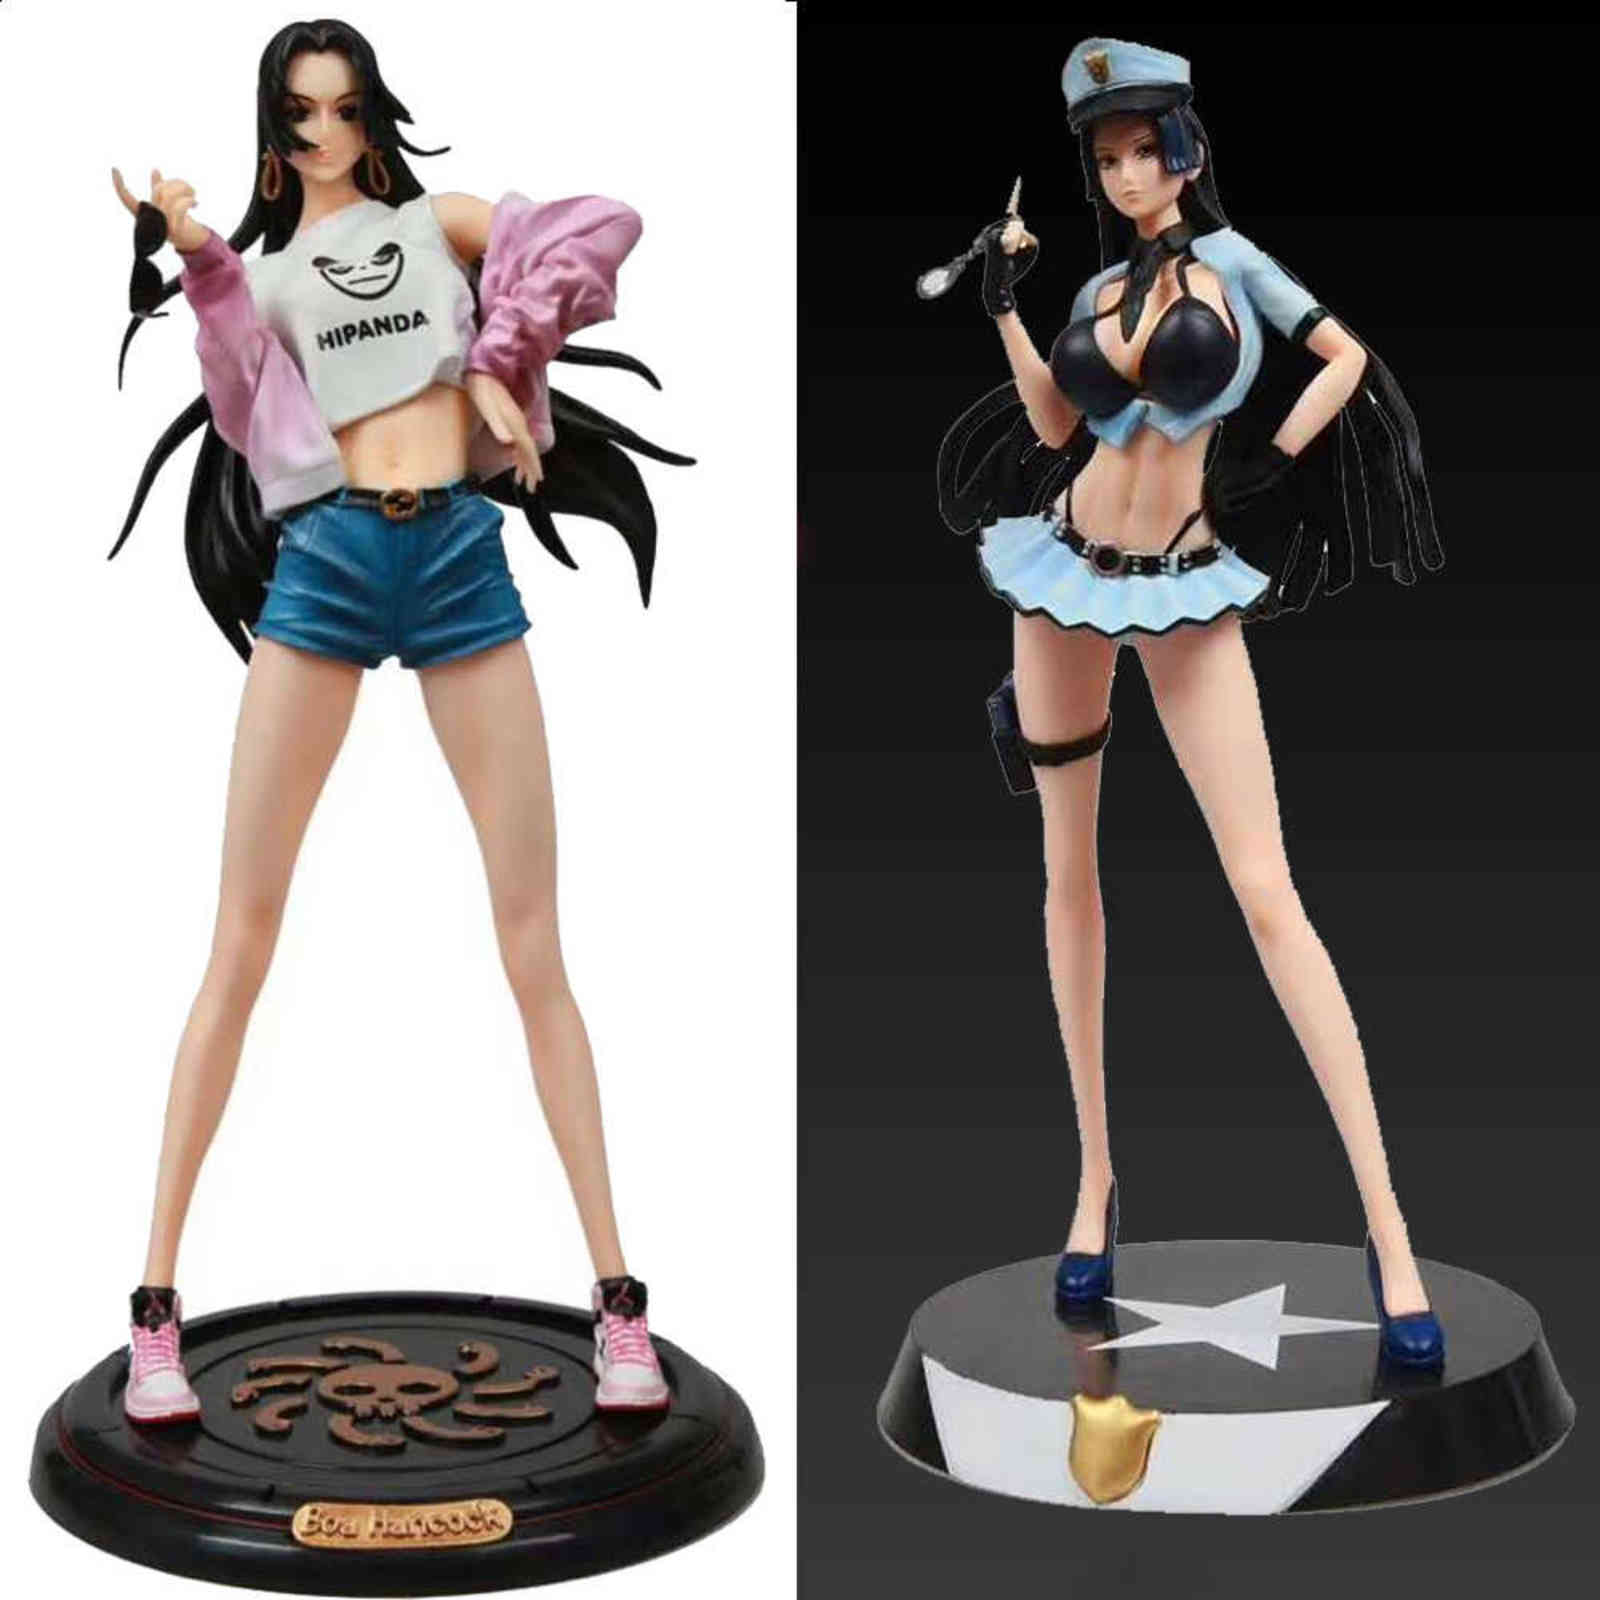 

32cm Japan Anime One Piece Boa Hancock Police GK PVC Action Figure Toy Sexy Girl Figures Adult Collection Model Doll Gifts H1105, No retail box